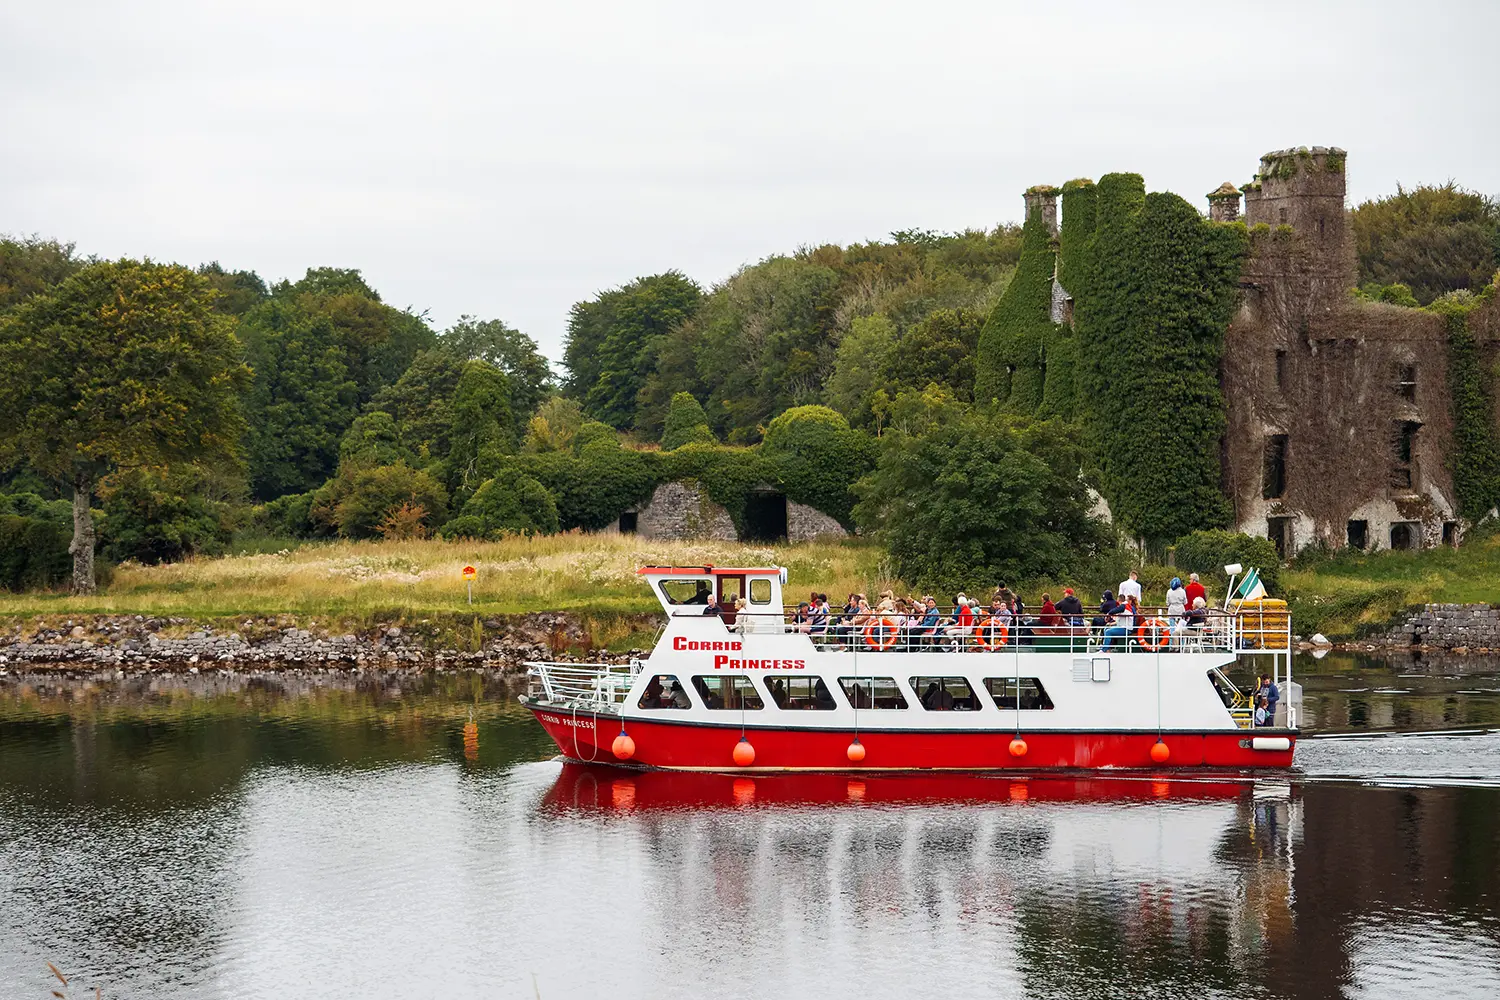  Corrib princess small cruise ship with tourist on board passing by popular town landmark Menlo castle